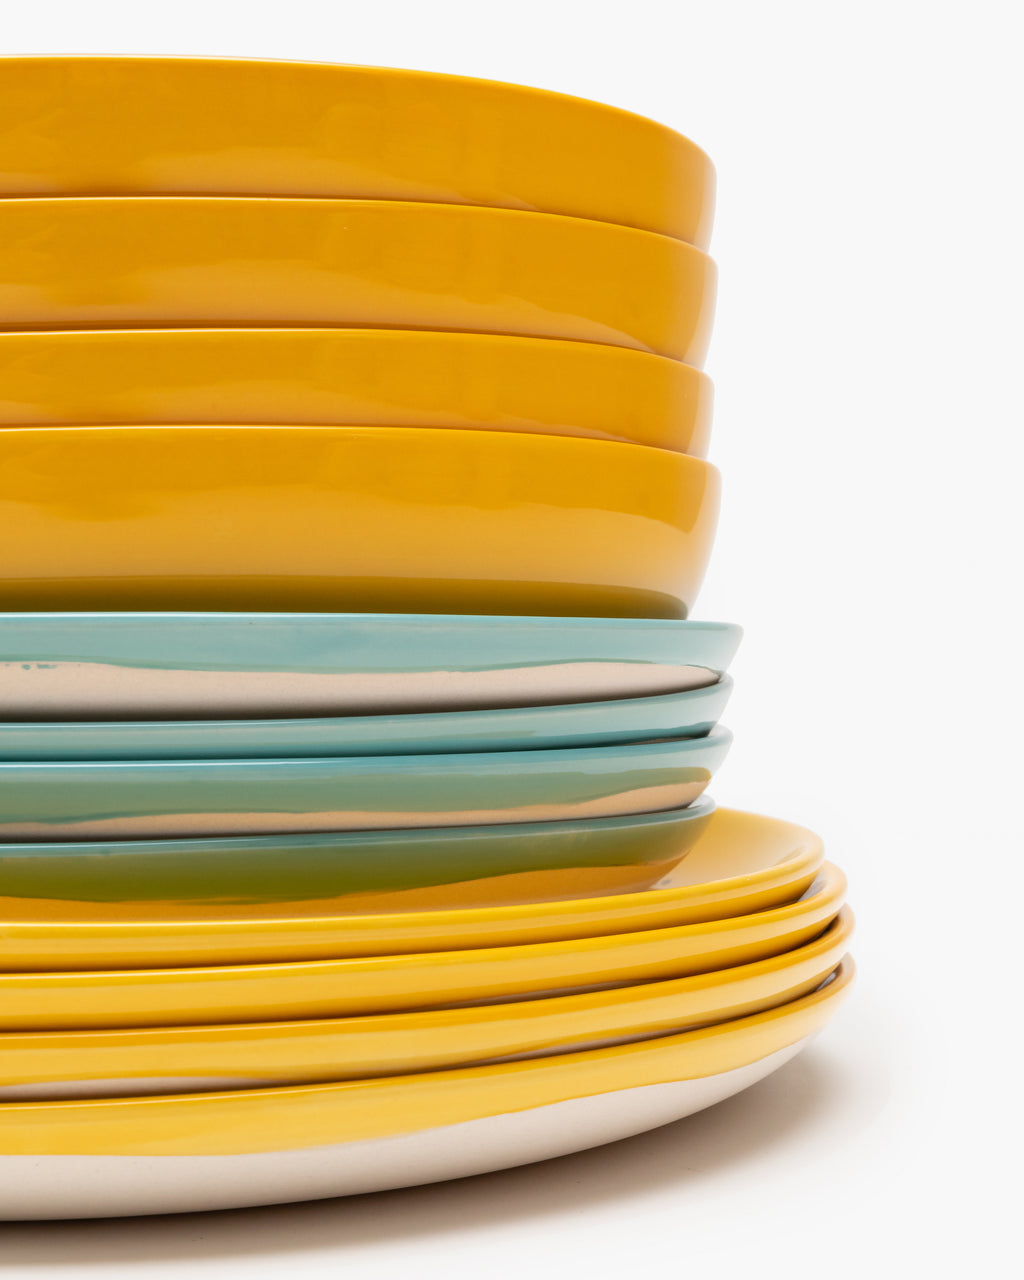 Dinner Set 12 pieces - Feast tableware by Ottolenghi - yellow